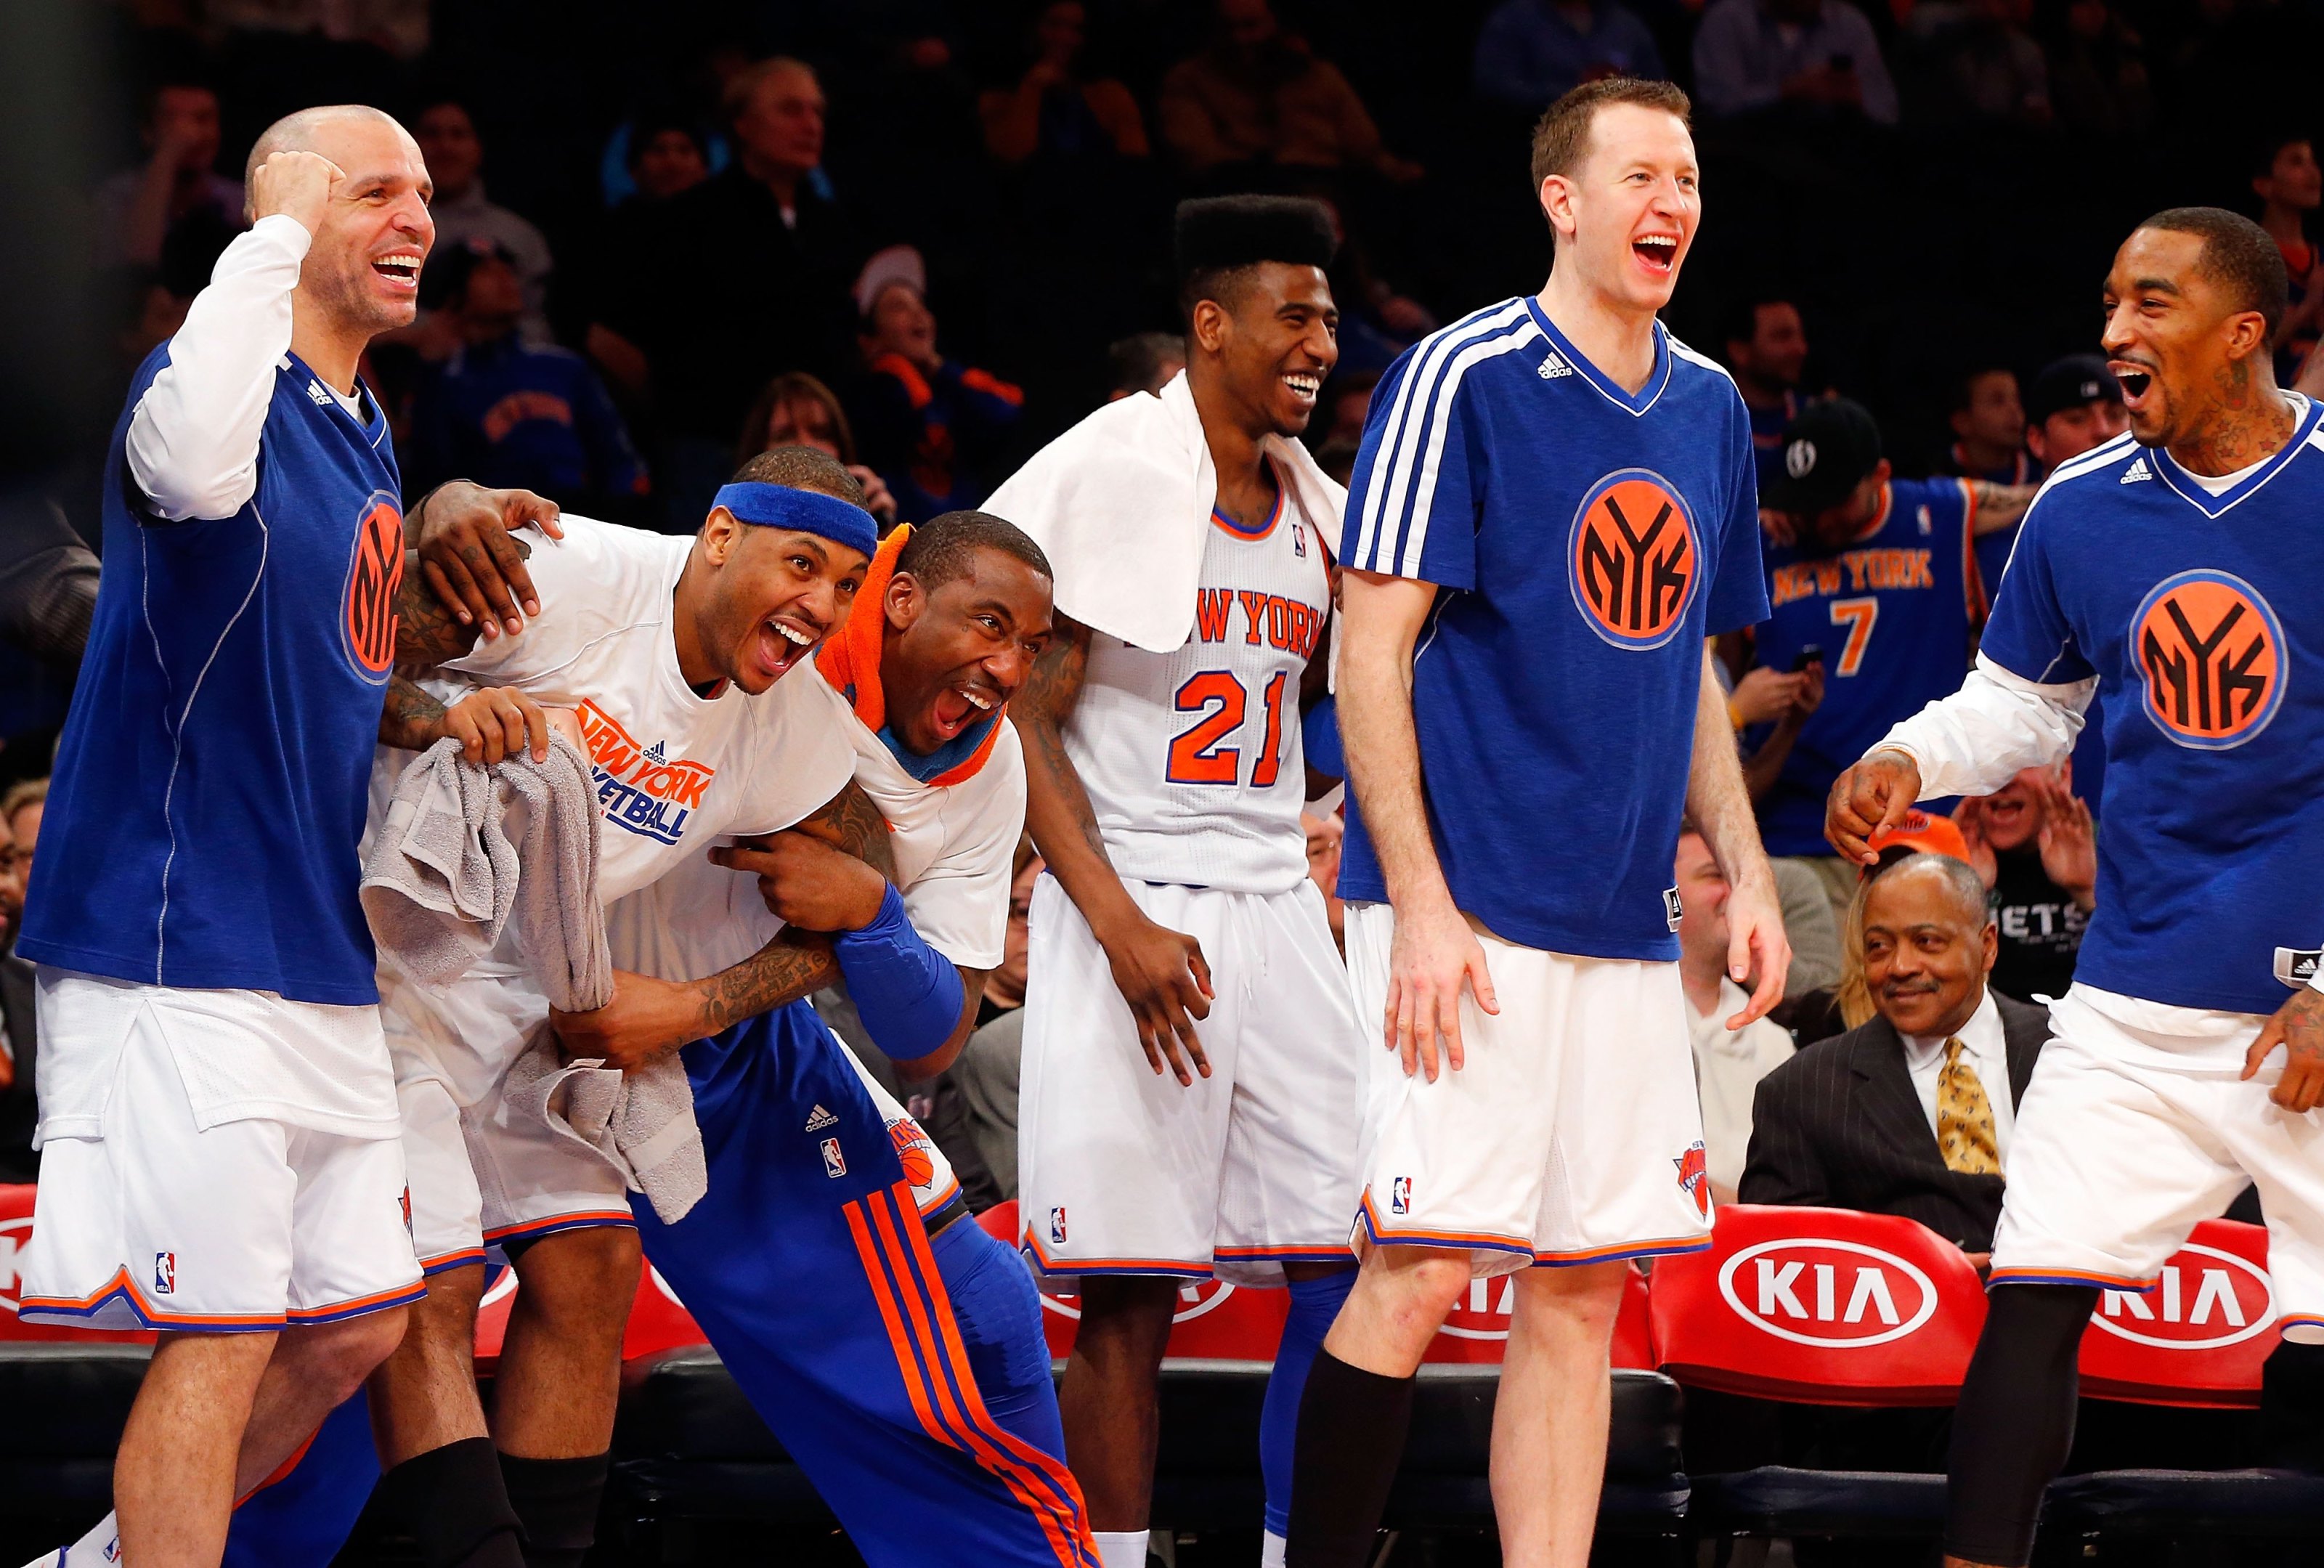 Knicks New Uniforms: Breaking Down New York's New Look for 2012-13